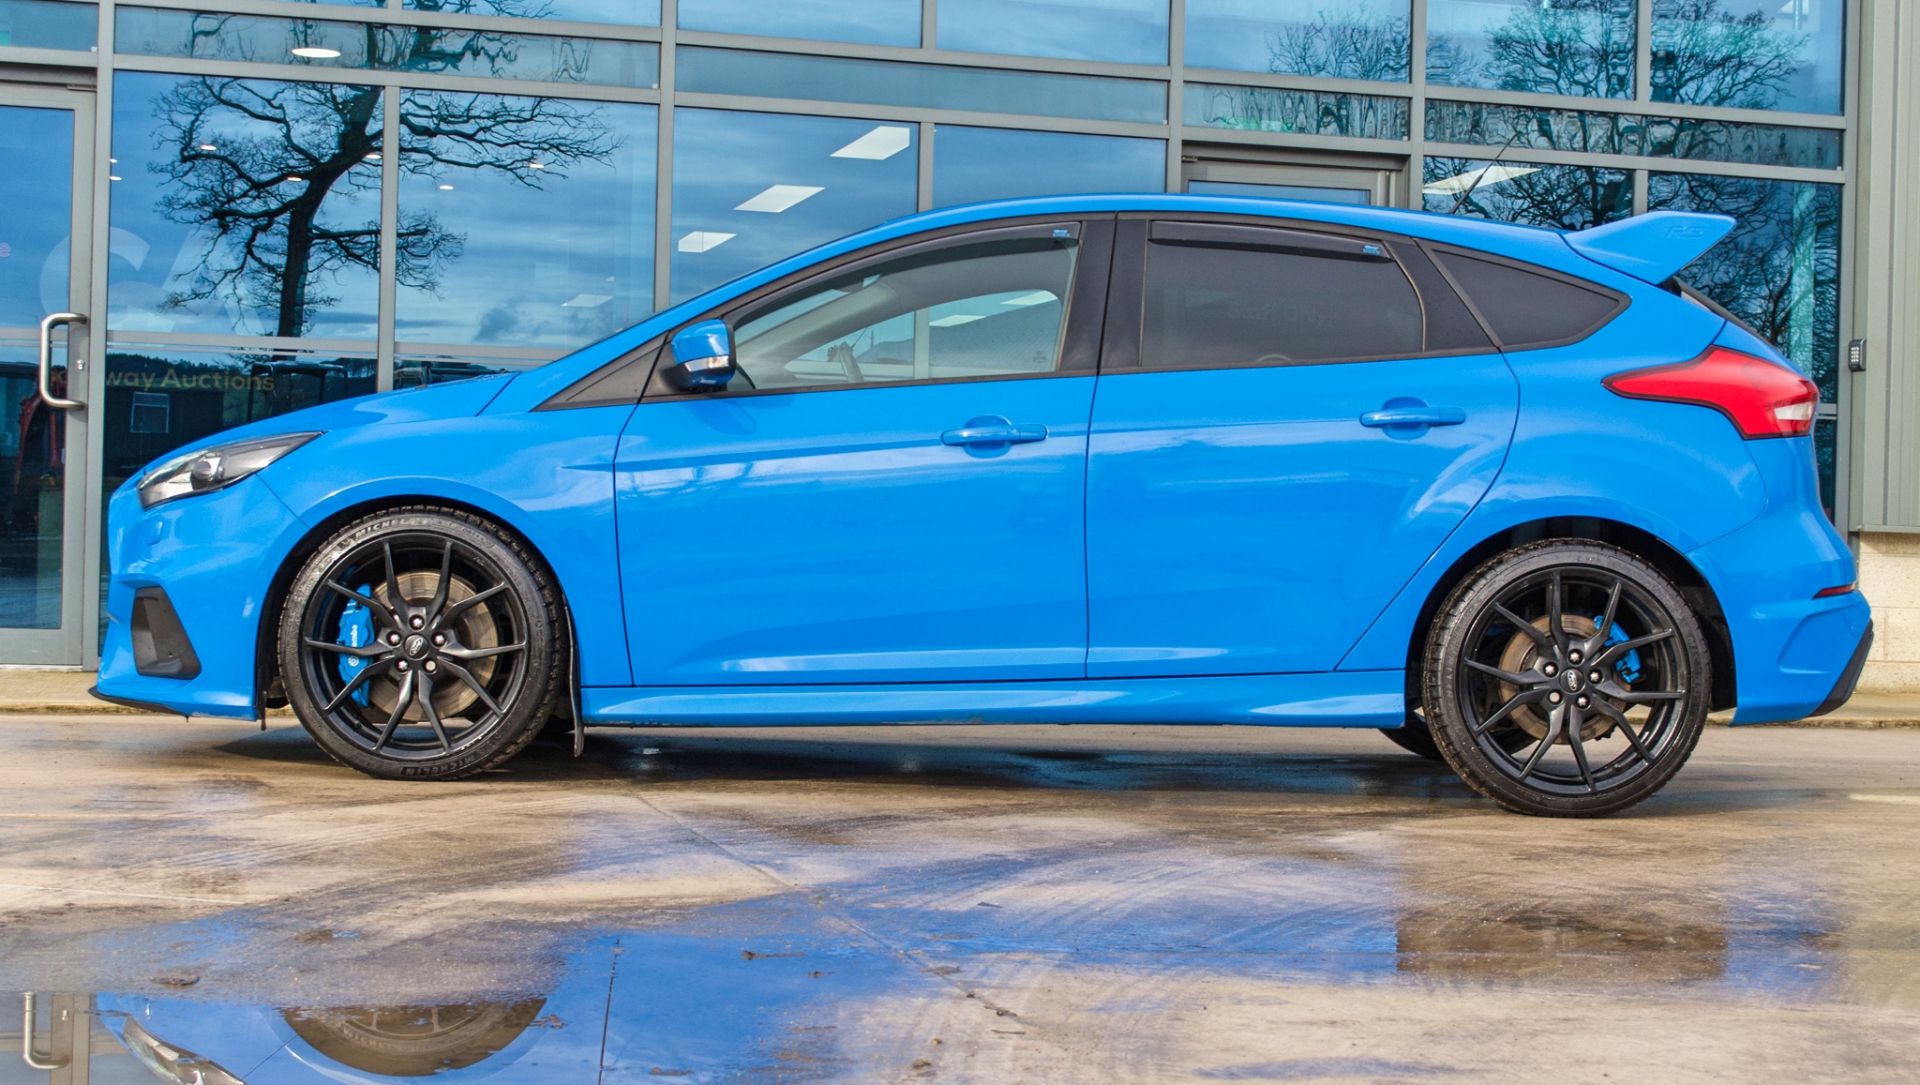 2017 Ford Focus 2.3 RS 5 door hatch back - Image 15 of 56